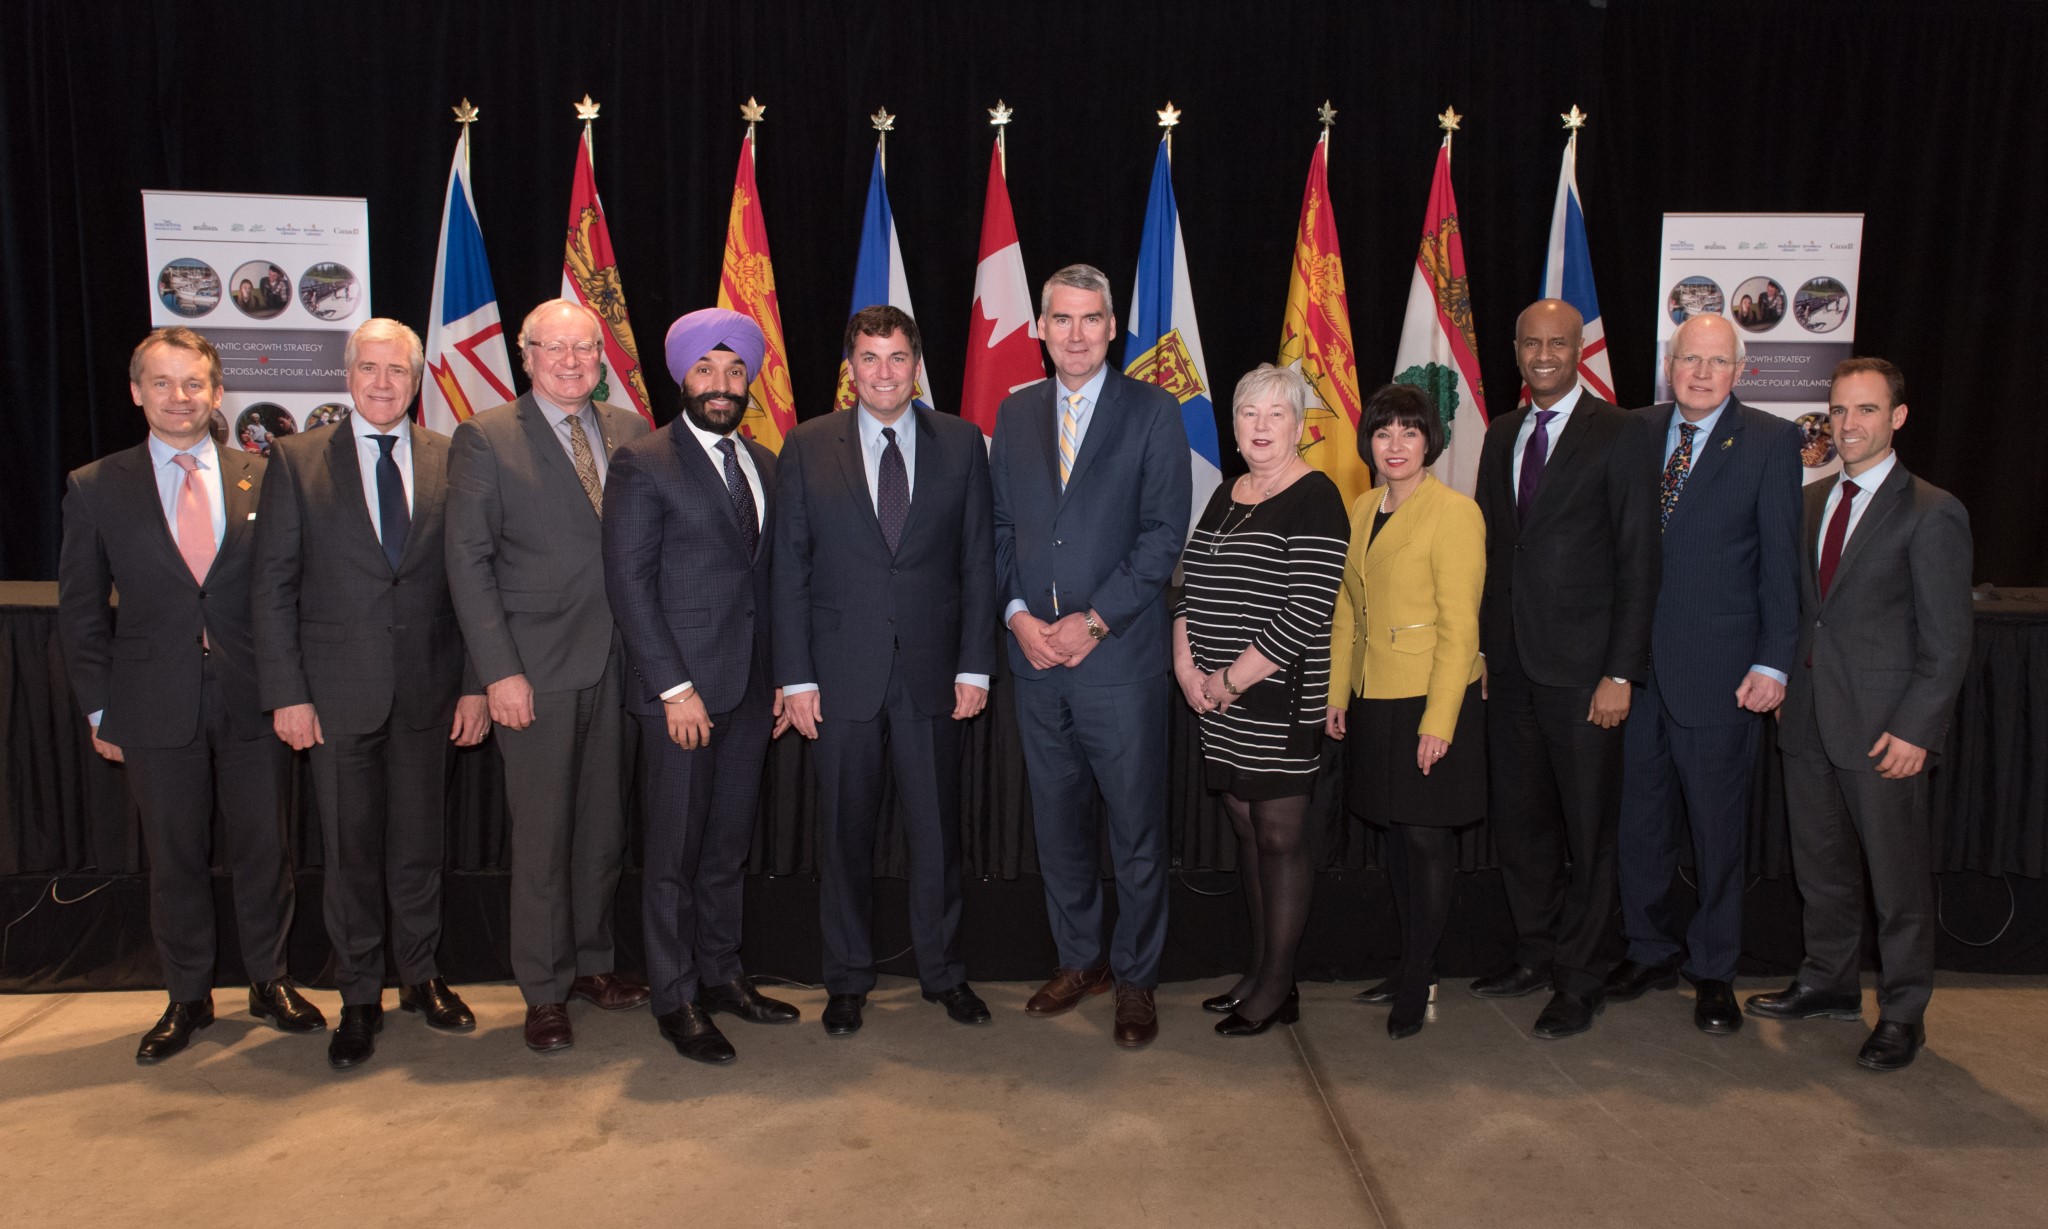 March 1, 2019 – Ministers and premiers were in Halifax, Nova Scotia to discuss progress on the Atlantic Growth Strategy and strategic initiatives to grow the Atlantic region. From left to right: Seamus O’Regan, Minister of Indigenous Services; Dwight Ball, Premier of Newfoundland and Labrador; Wade MacLauchlan, Premier of Prince Edward Island; Navdeep Bains, Minister of Innovation, Science and Economic Development and Minister responsible for ACOA; Dominic LeBlanc, Minister of Intergovernmental and Northern Affairs and Internal Trade; Stephen McNeil, Premier of Nova Scotia; Bernadette Jordan, Minister of Rural Economic Development; Ginette Petitpas Taylor, Minister of Health; Ahmed Hussen, Minister of Immigration, Refugees and Citizenship; Greg Thompson, New Brunswick Minister responsible for Intergovernmental Affairs (attending on behalf of New Brunswick Premier Blaine Higgs); and Matt DeCourcey, Parliamentary Secretary to the Minister of Immigration, Refugees and Citizenship.